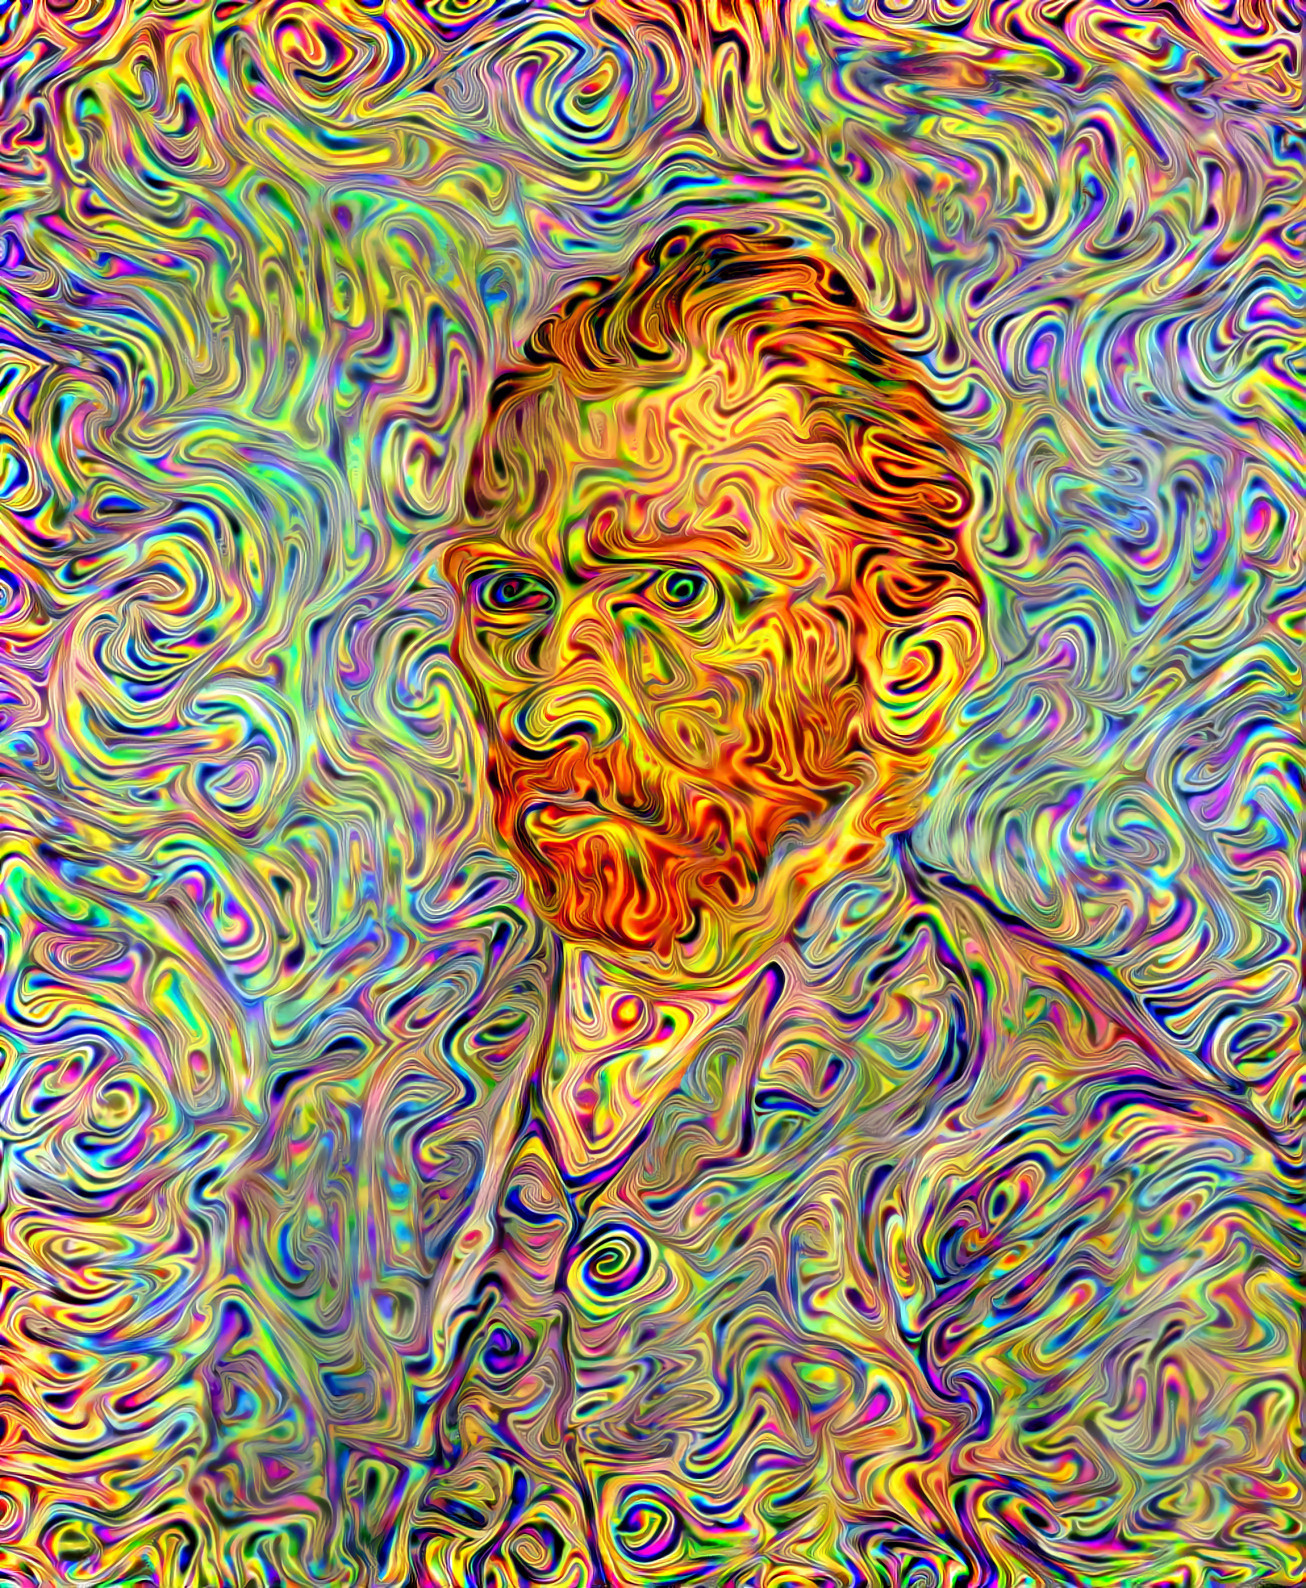 A Madness of Whorls - source image by Van Gogh; style by Daniel W. Prust